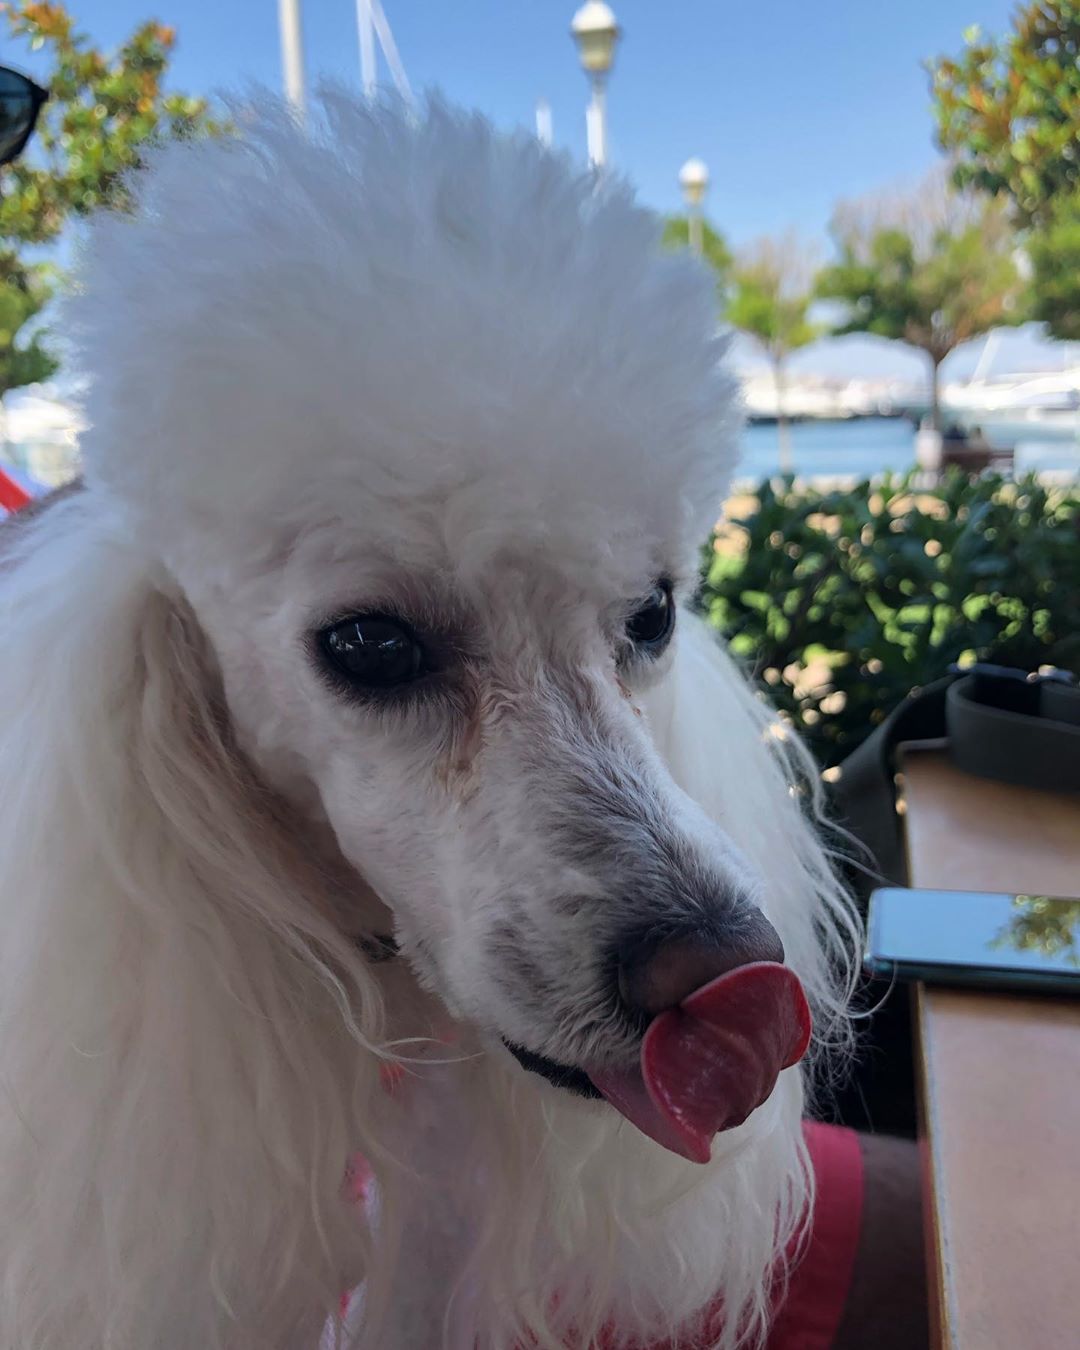 White adult Poodle licking its nose